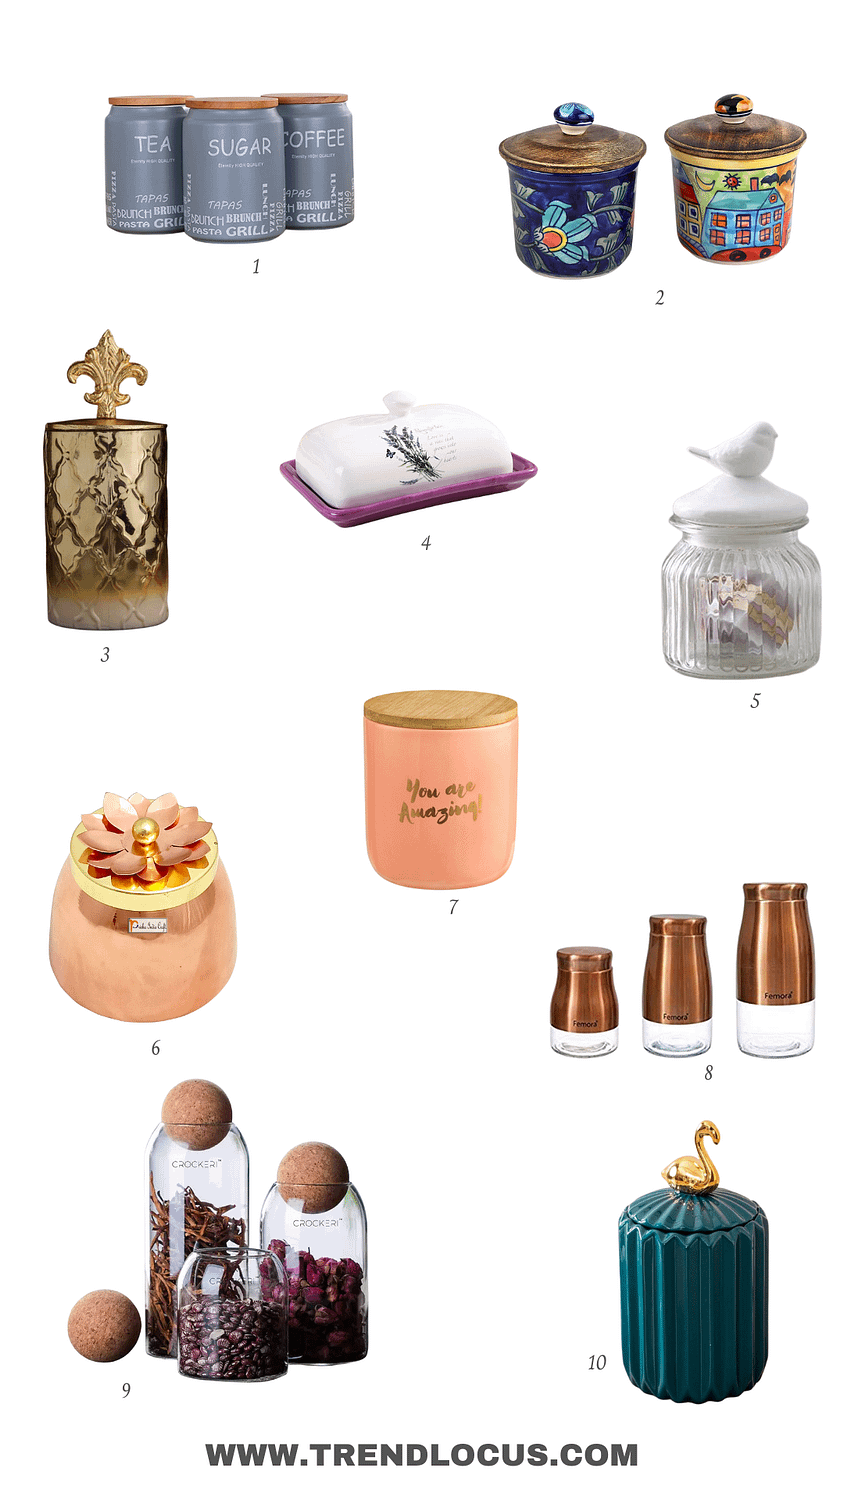 moodboard of jars and canisters available on amazon